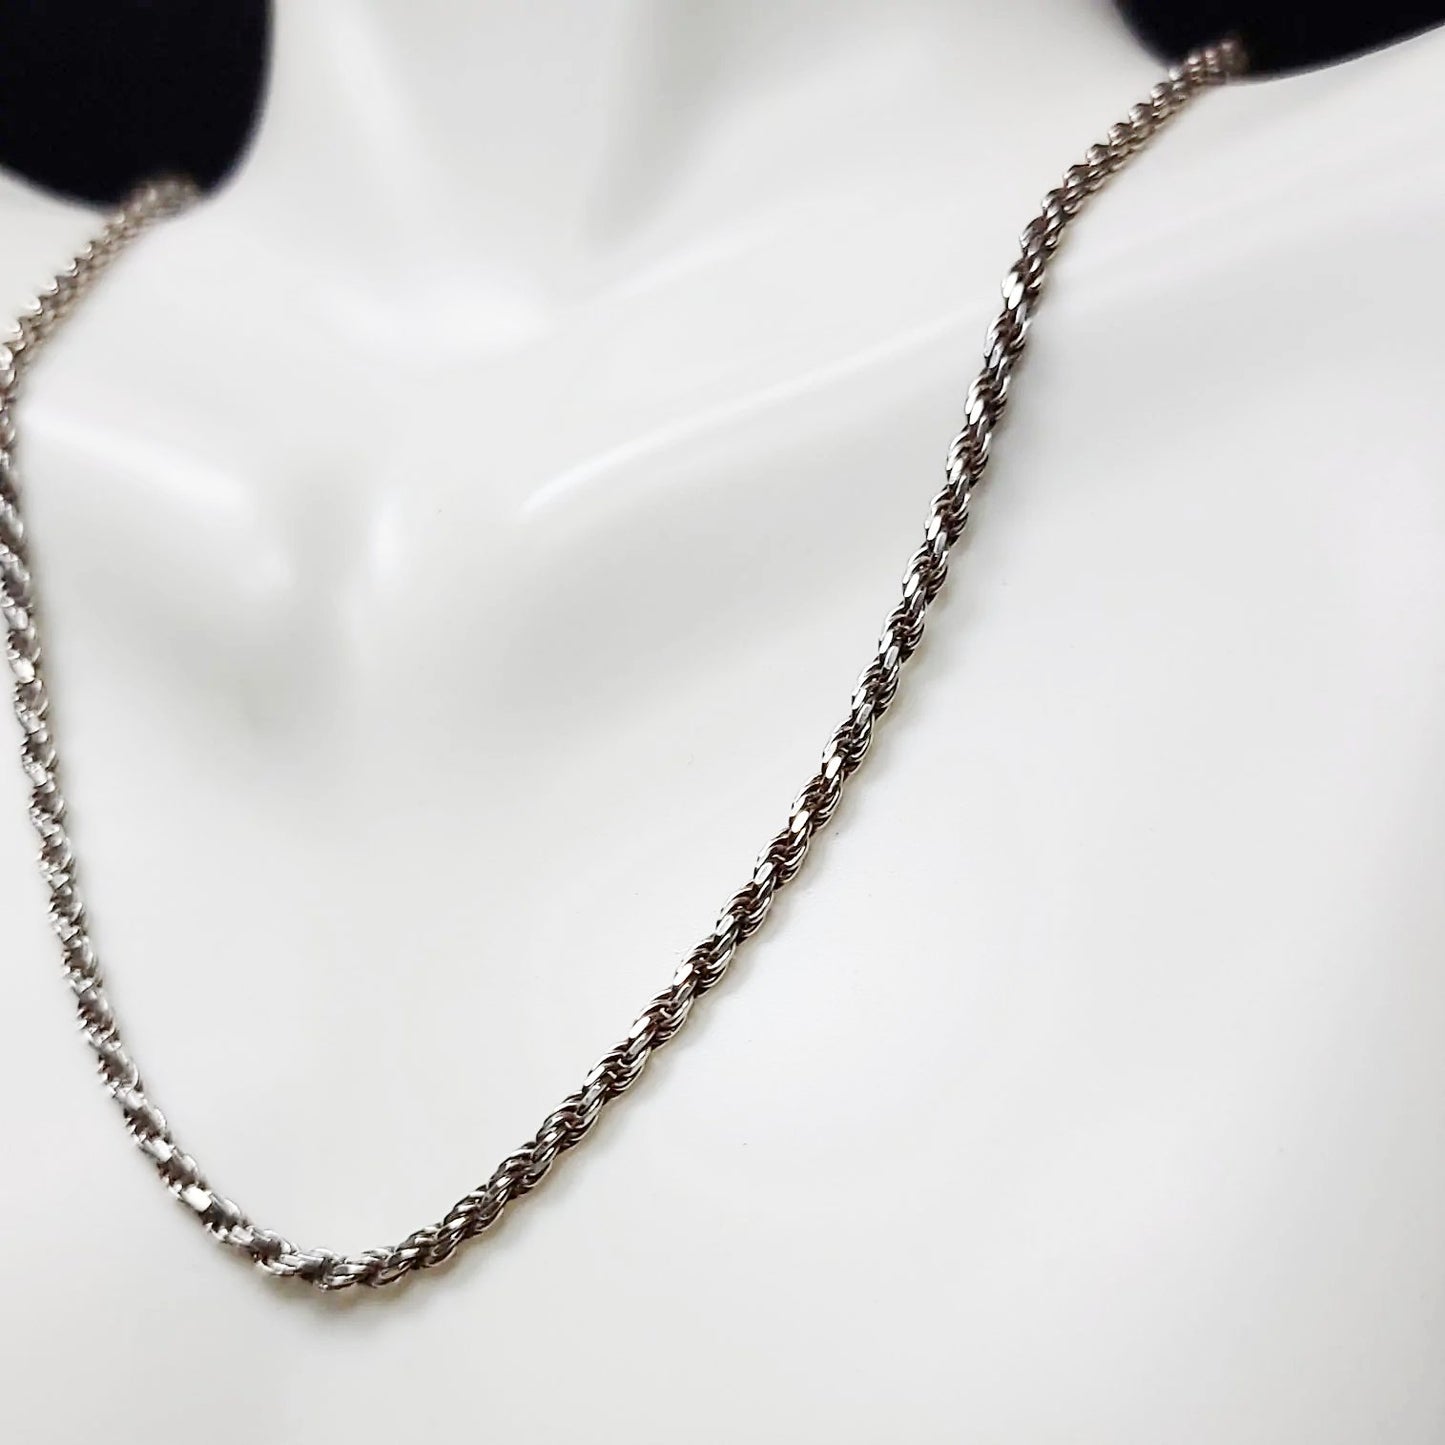 Silver Rope Chain 16" Necklace Sterling 925 - Elevated Metaphysical